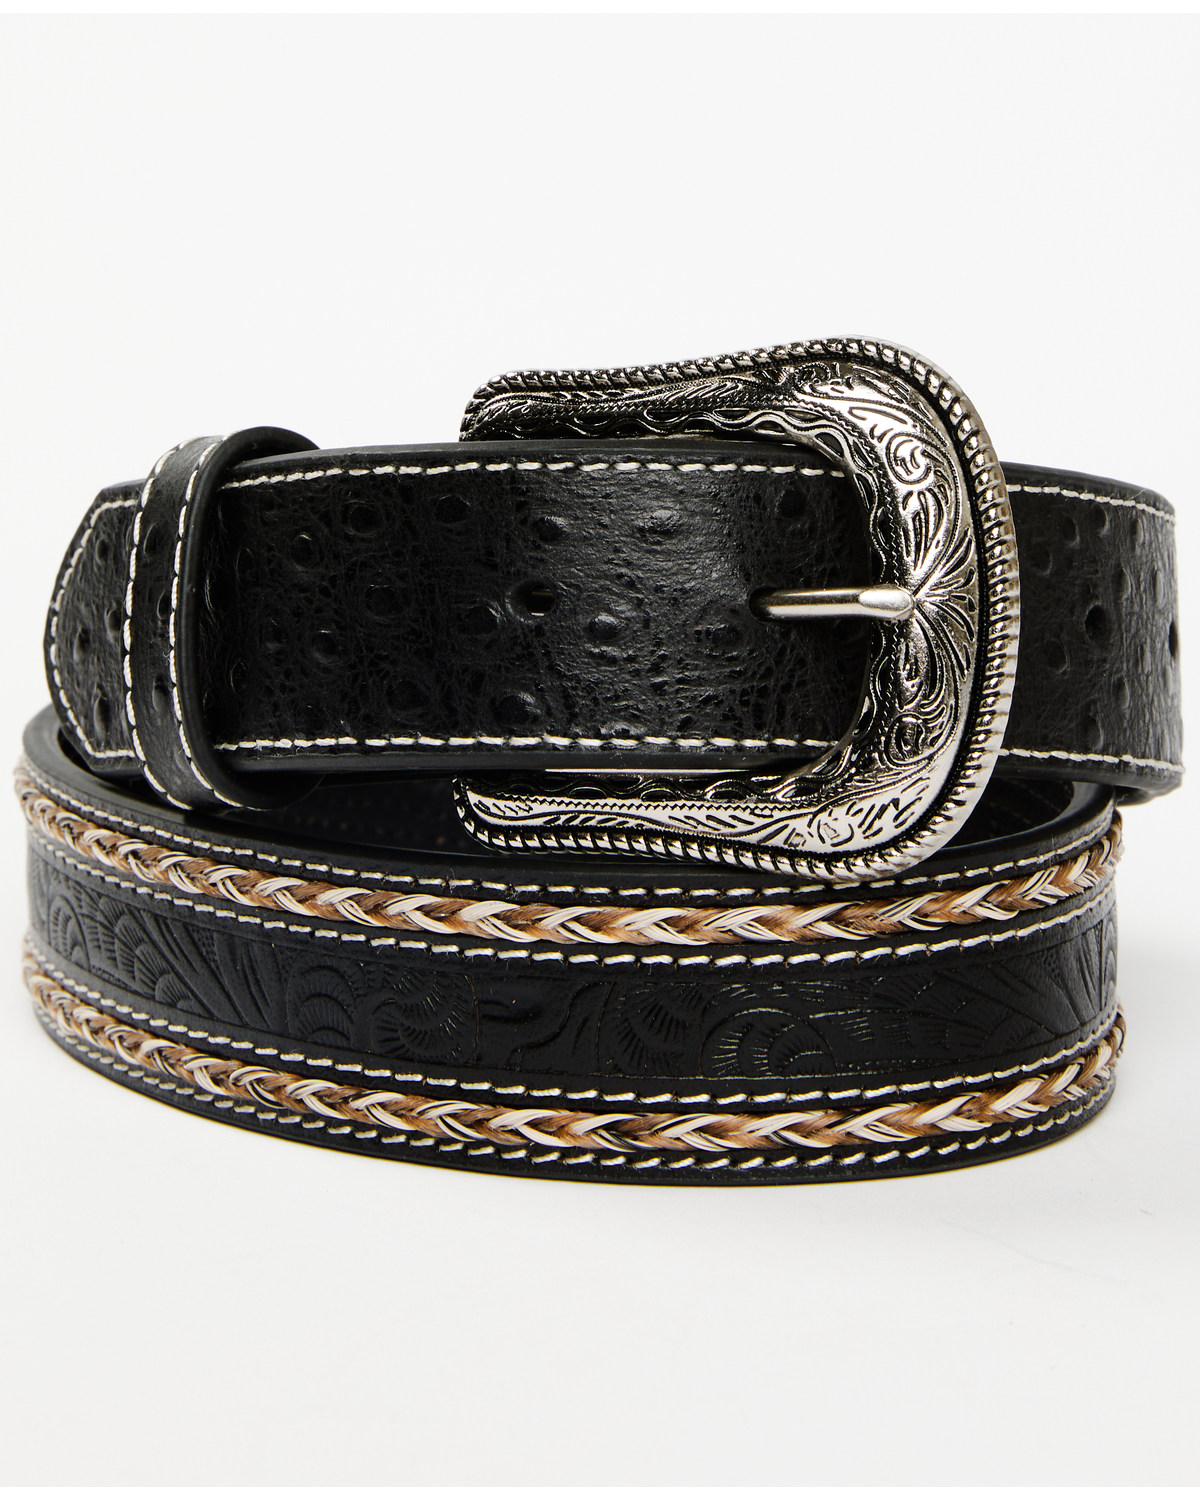 Cody James Men's Horsehair with Floral Tooled Inlay Belt